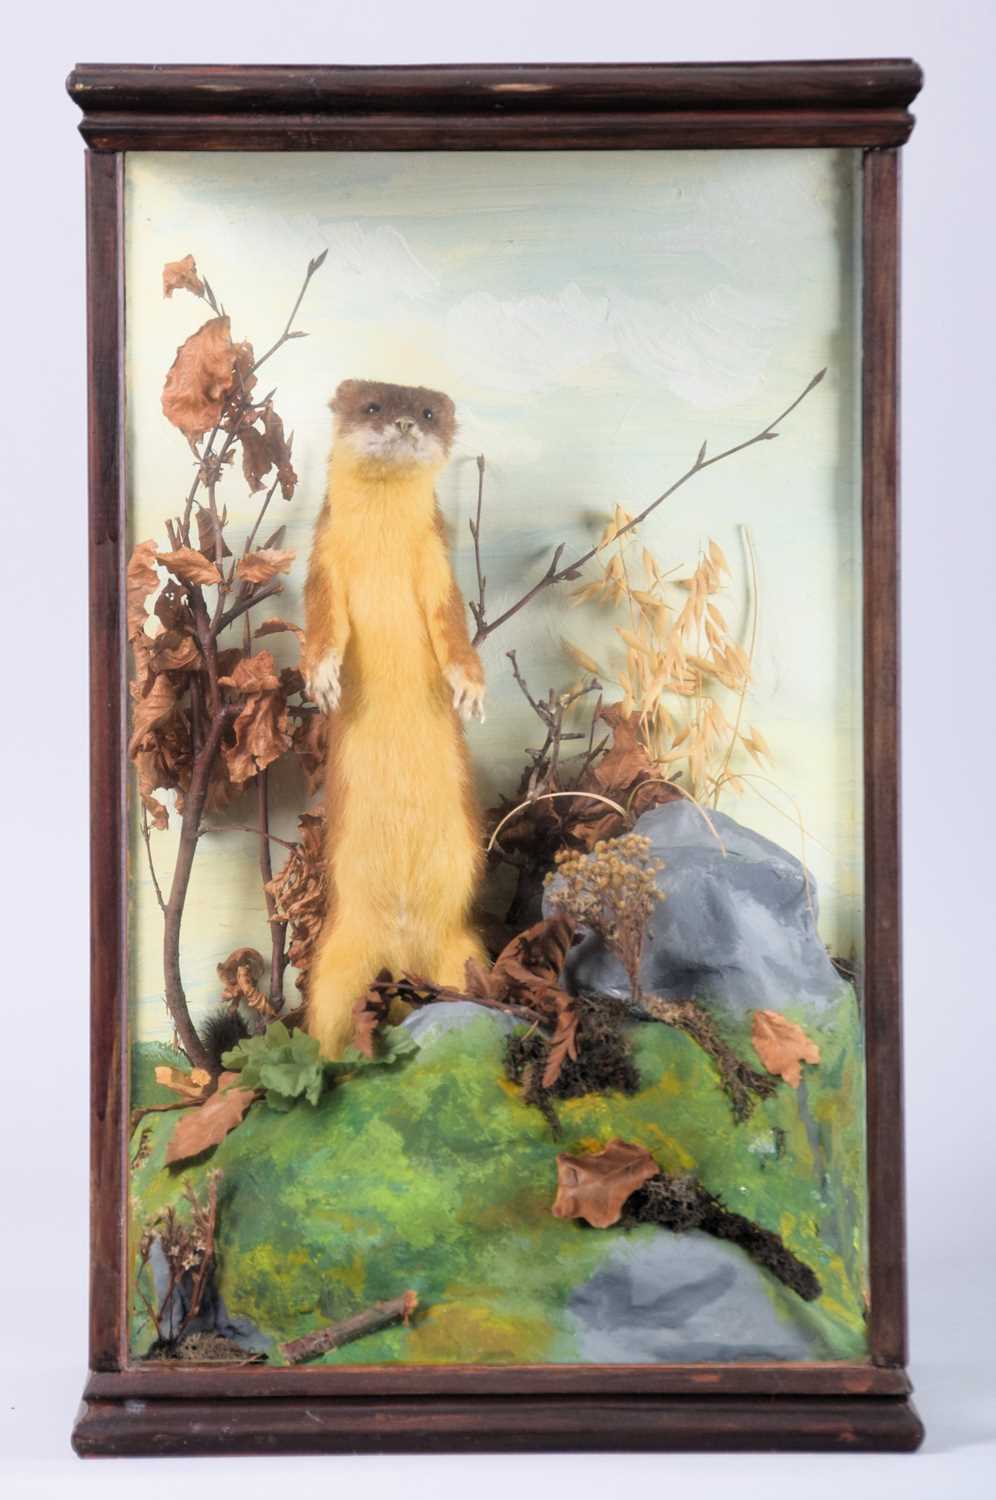 Taxidermy: A Cased European Stoat (Mustela erminea), late 20th century, a full mount adult in